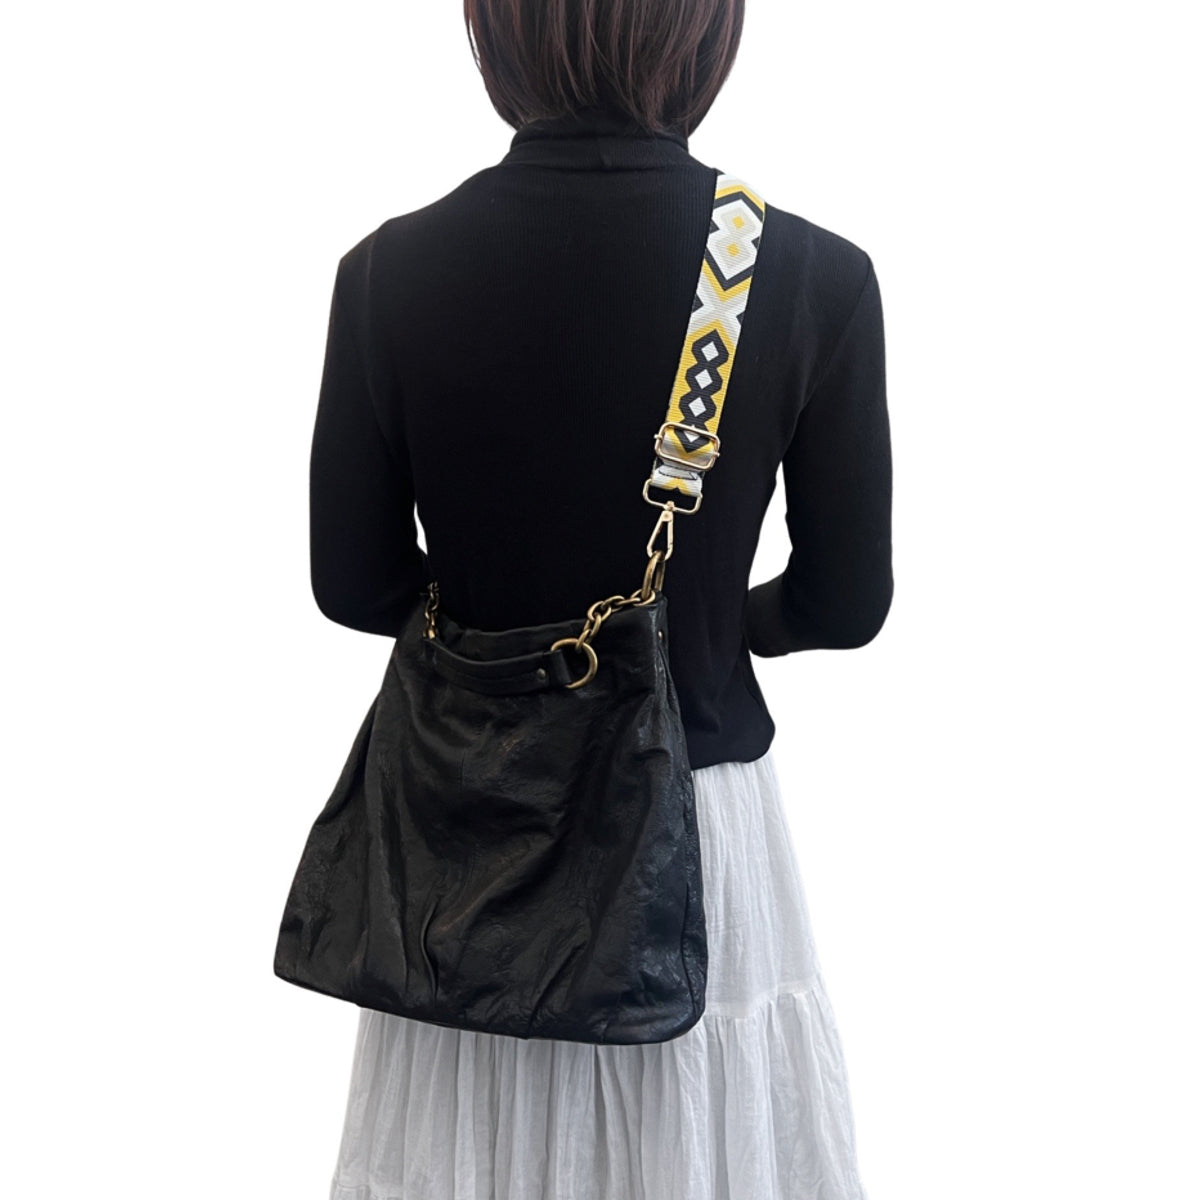 Leather Bum Bag With Replacement Bag Straps. A Stylish and 